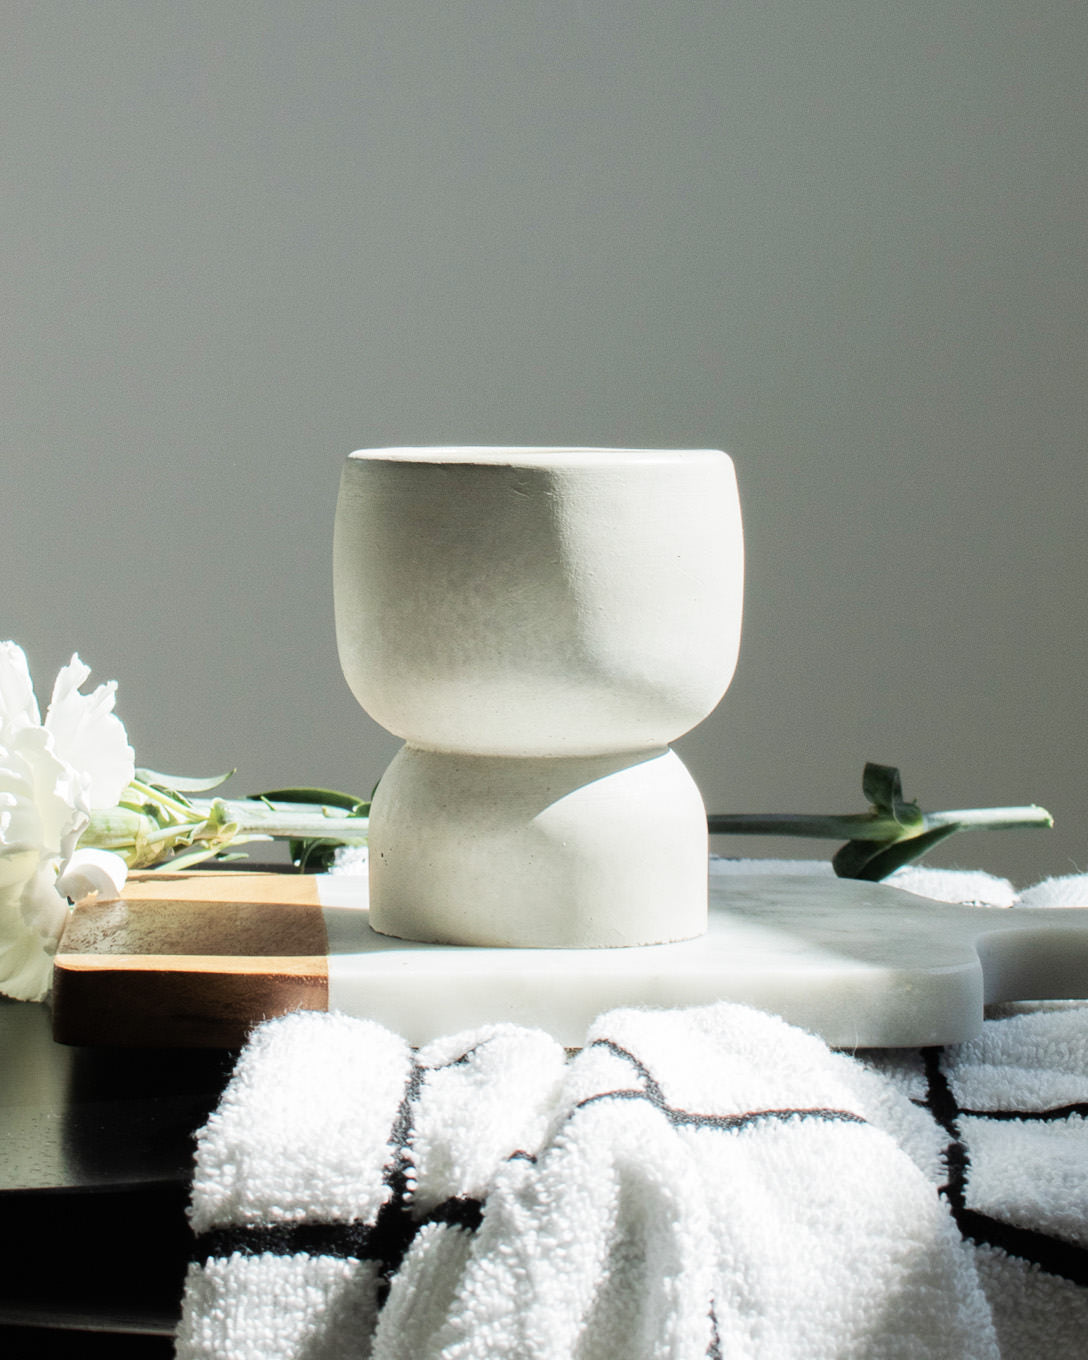 100% Homebody Coconut Soy Candle - Concrete Pedestal